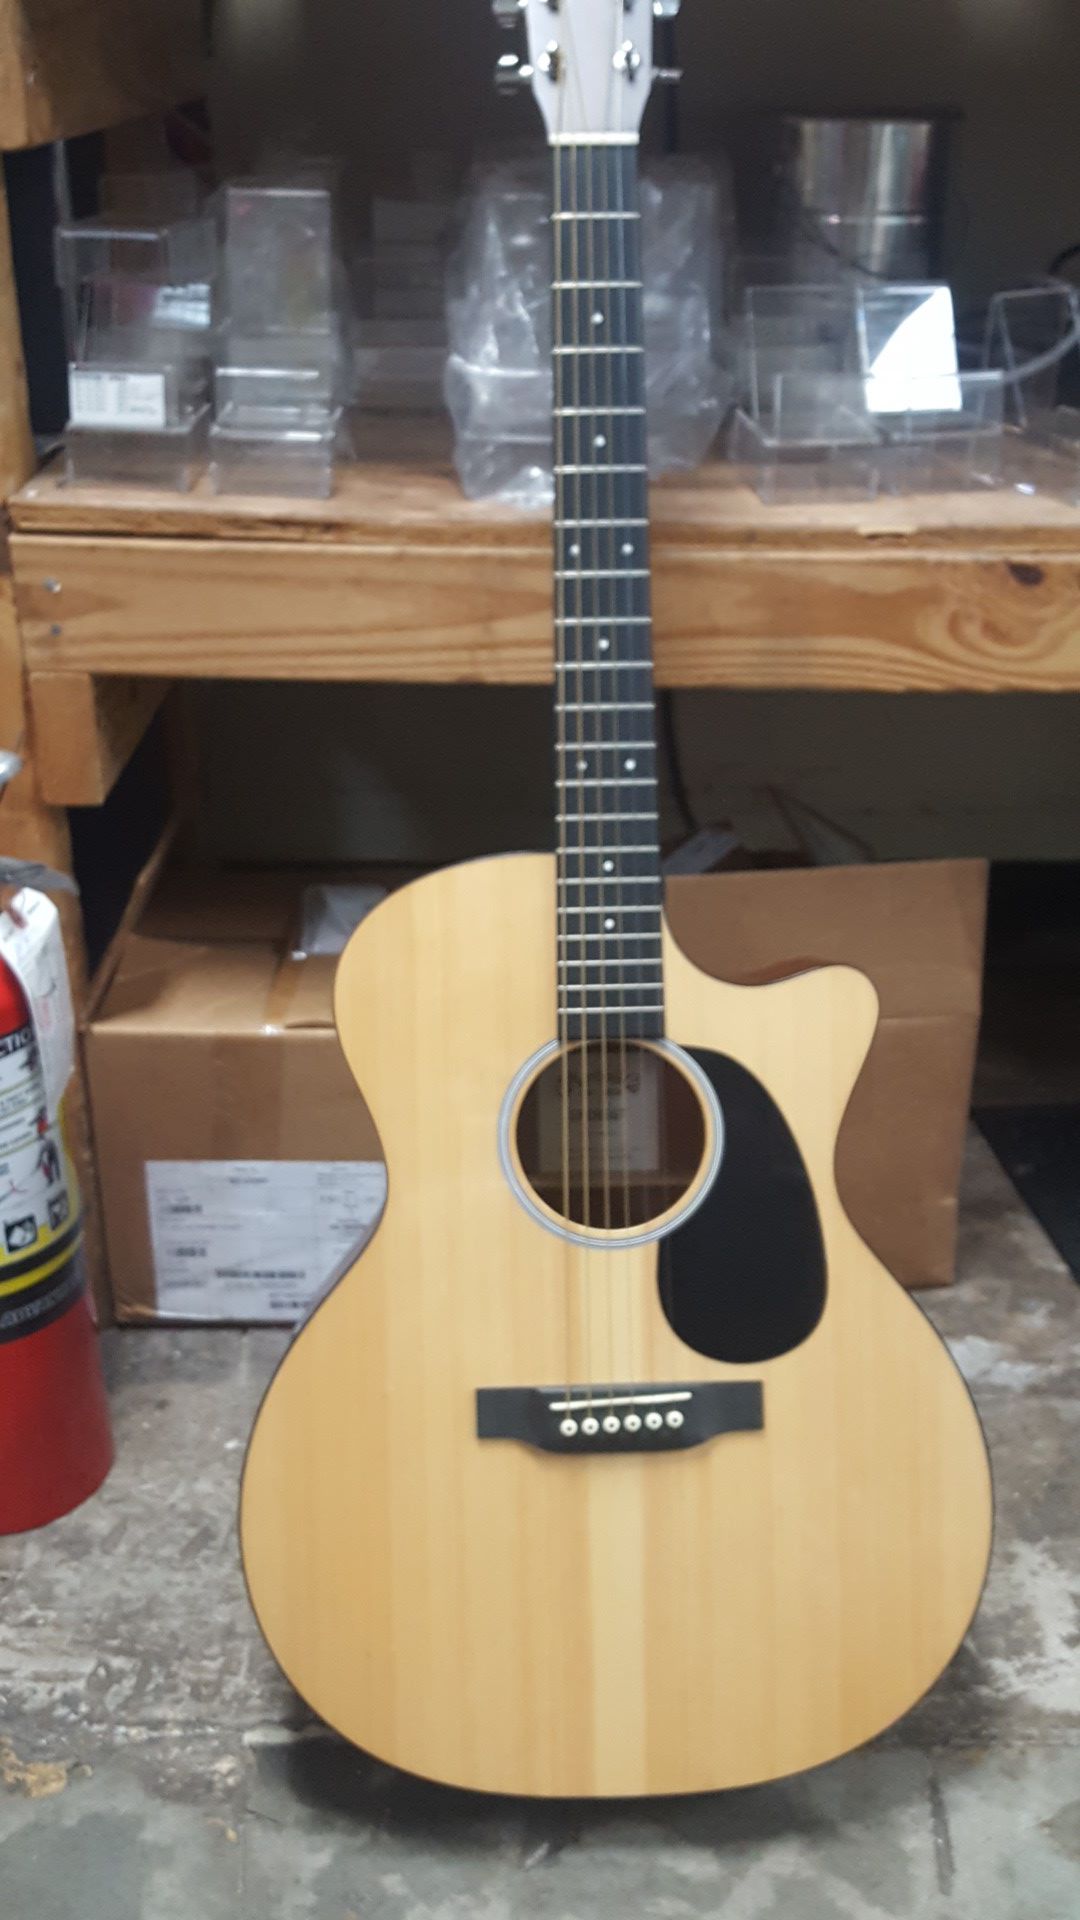 Martin & Co Acoustic Electric Guitar